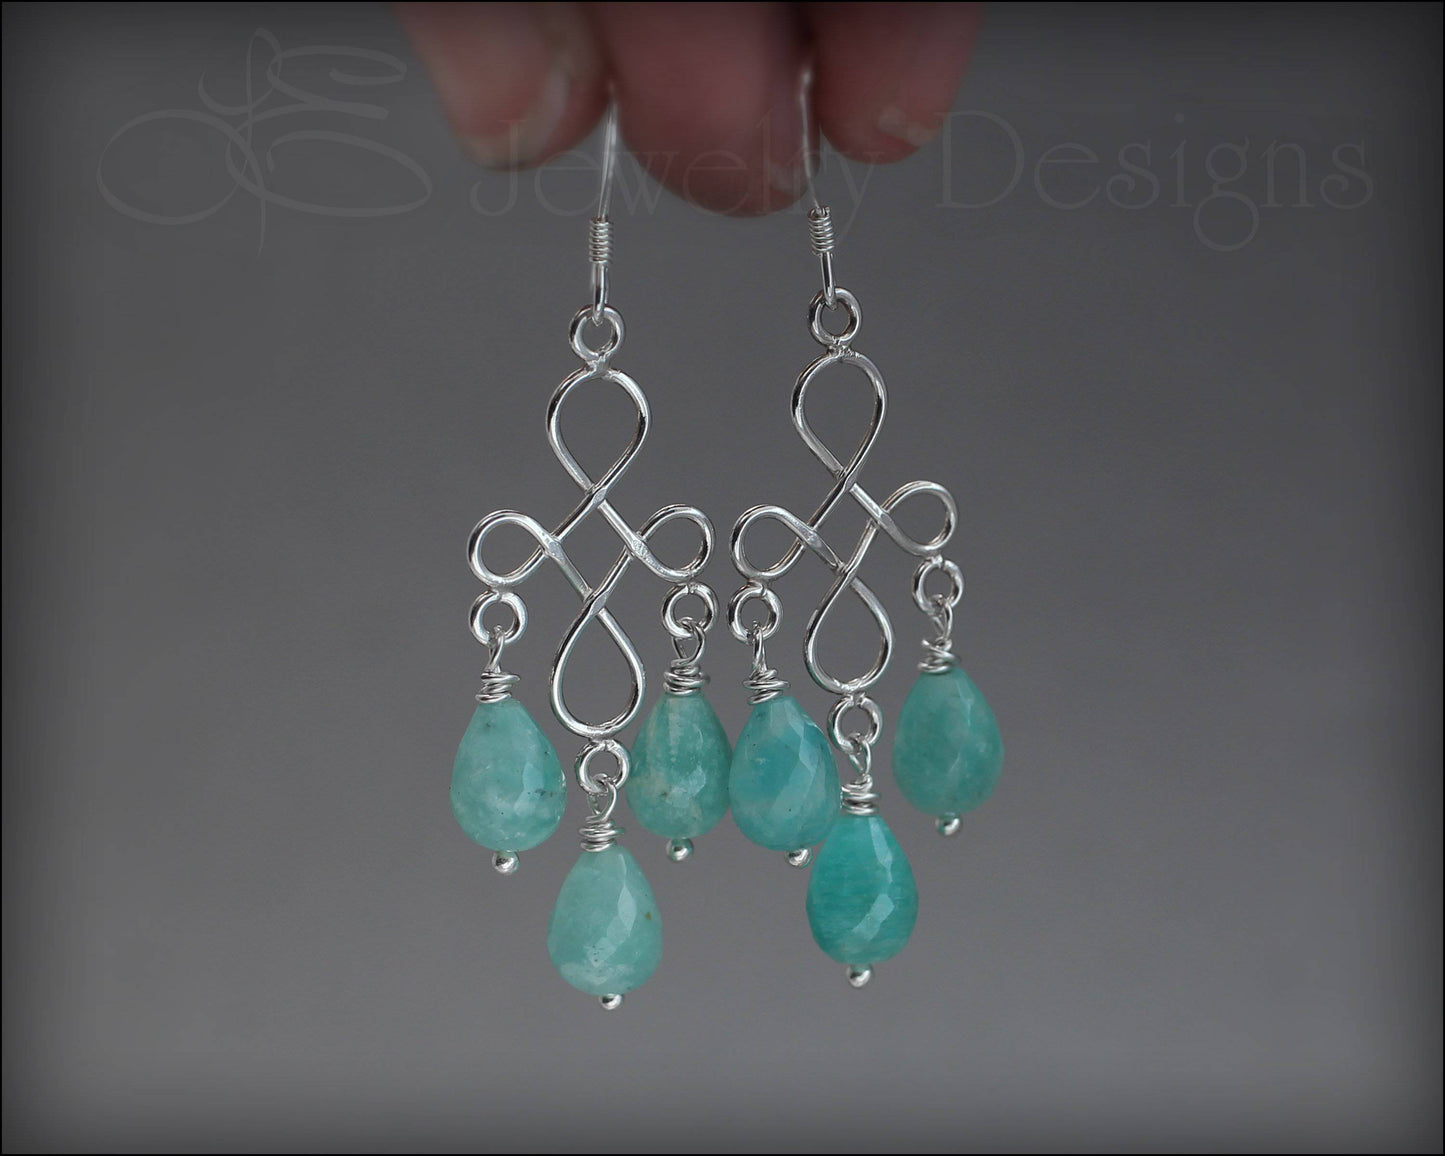 Load image into Gallery viewer, Sterling Amazonite Chandelier Earrings - LE Jewelry Designs
